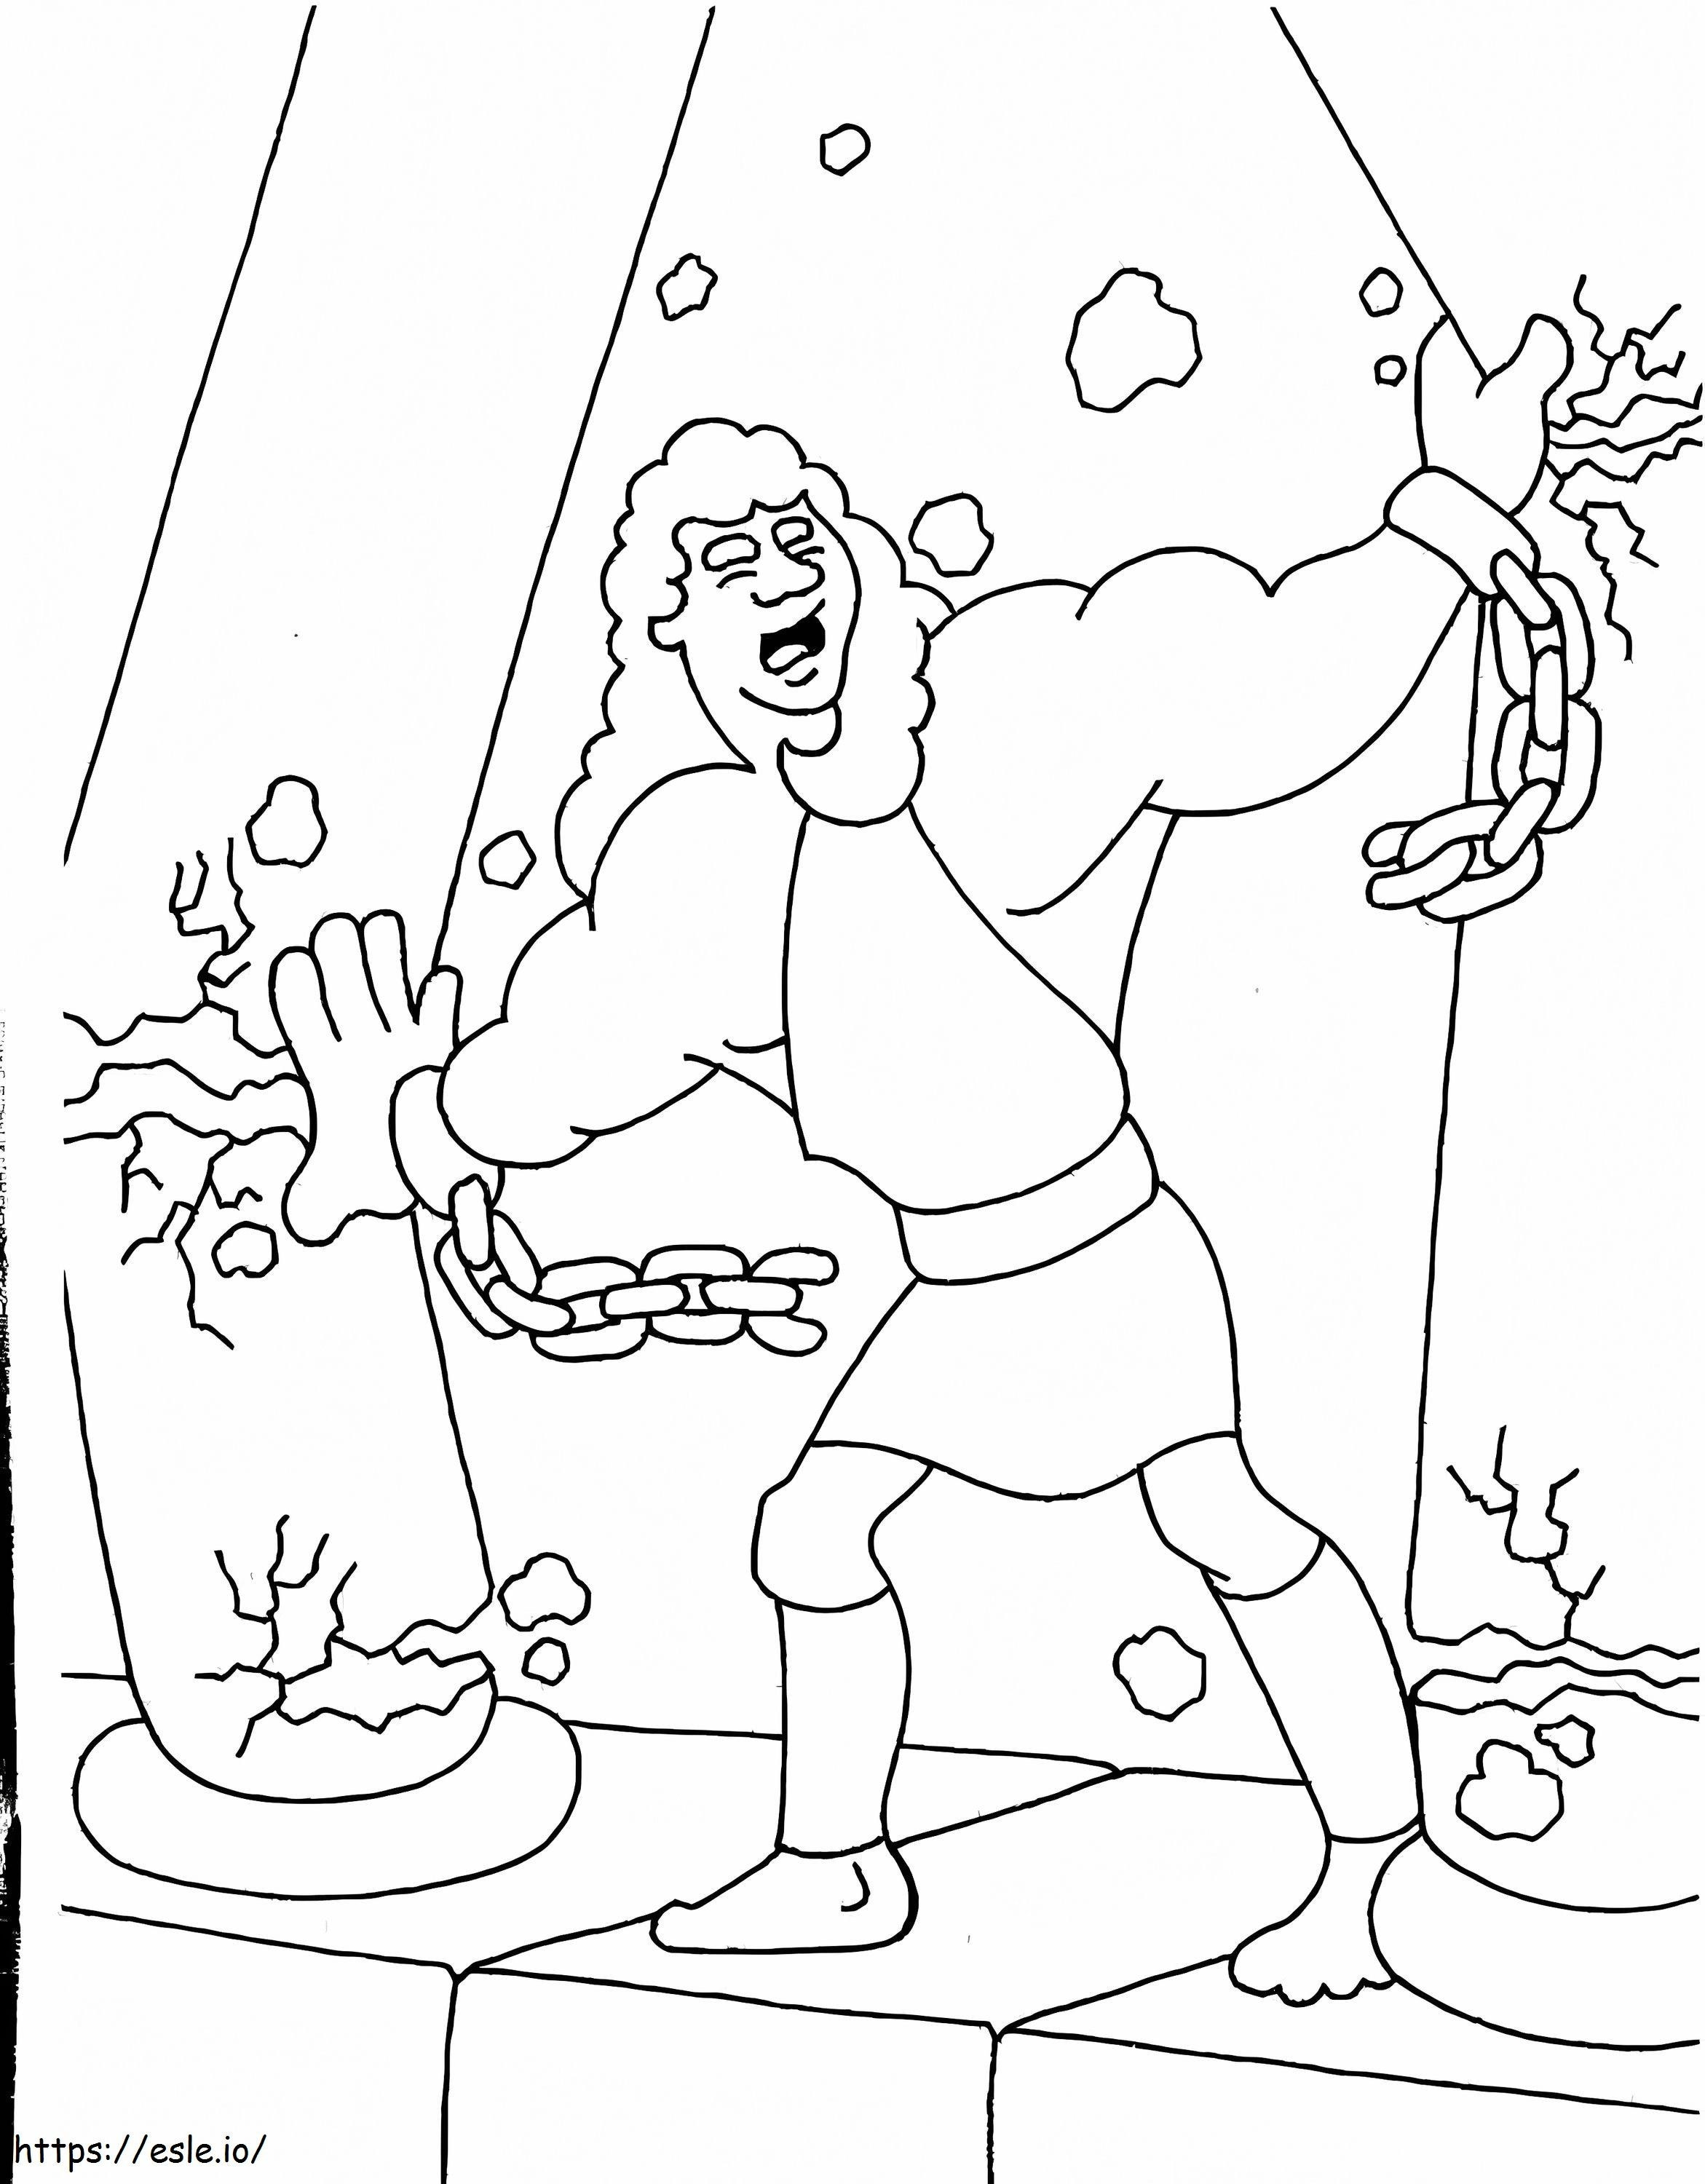 Sampson Strength coloring page